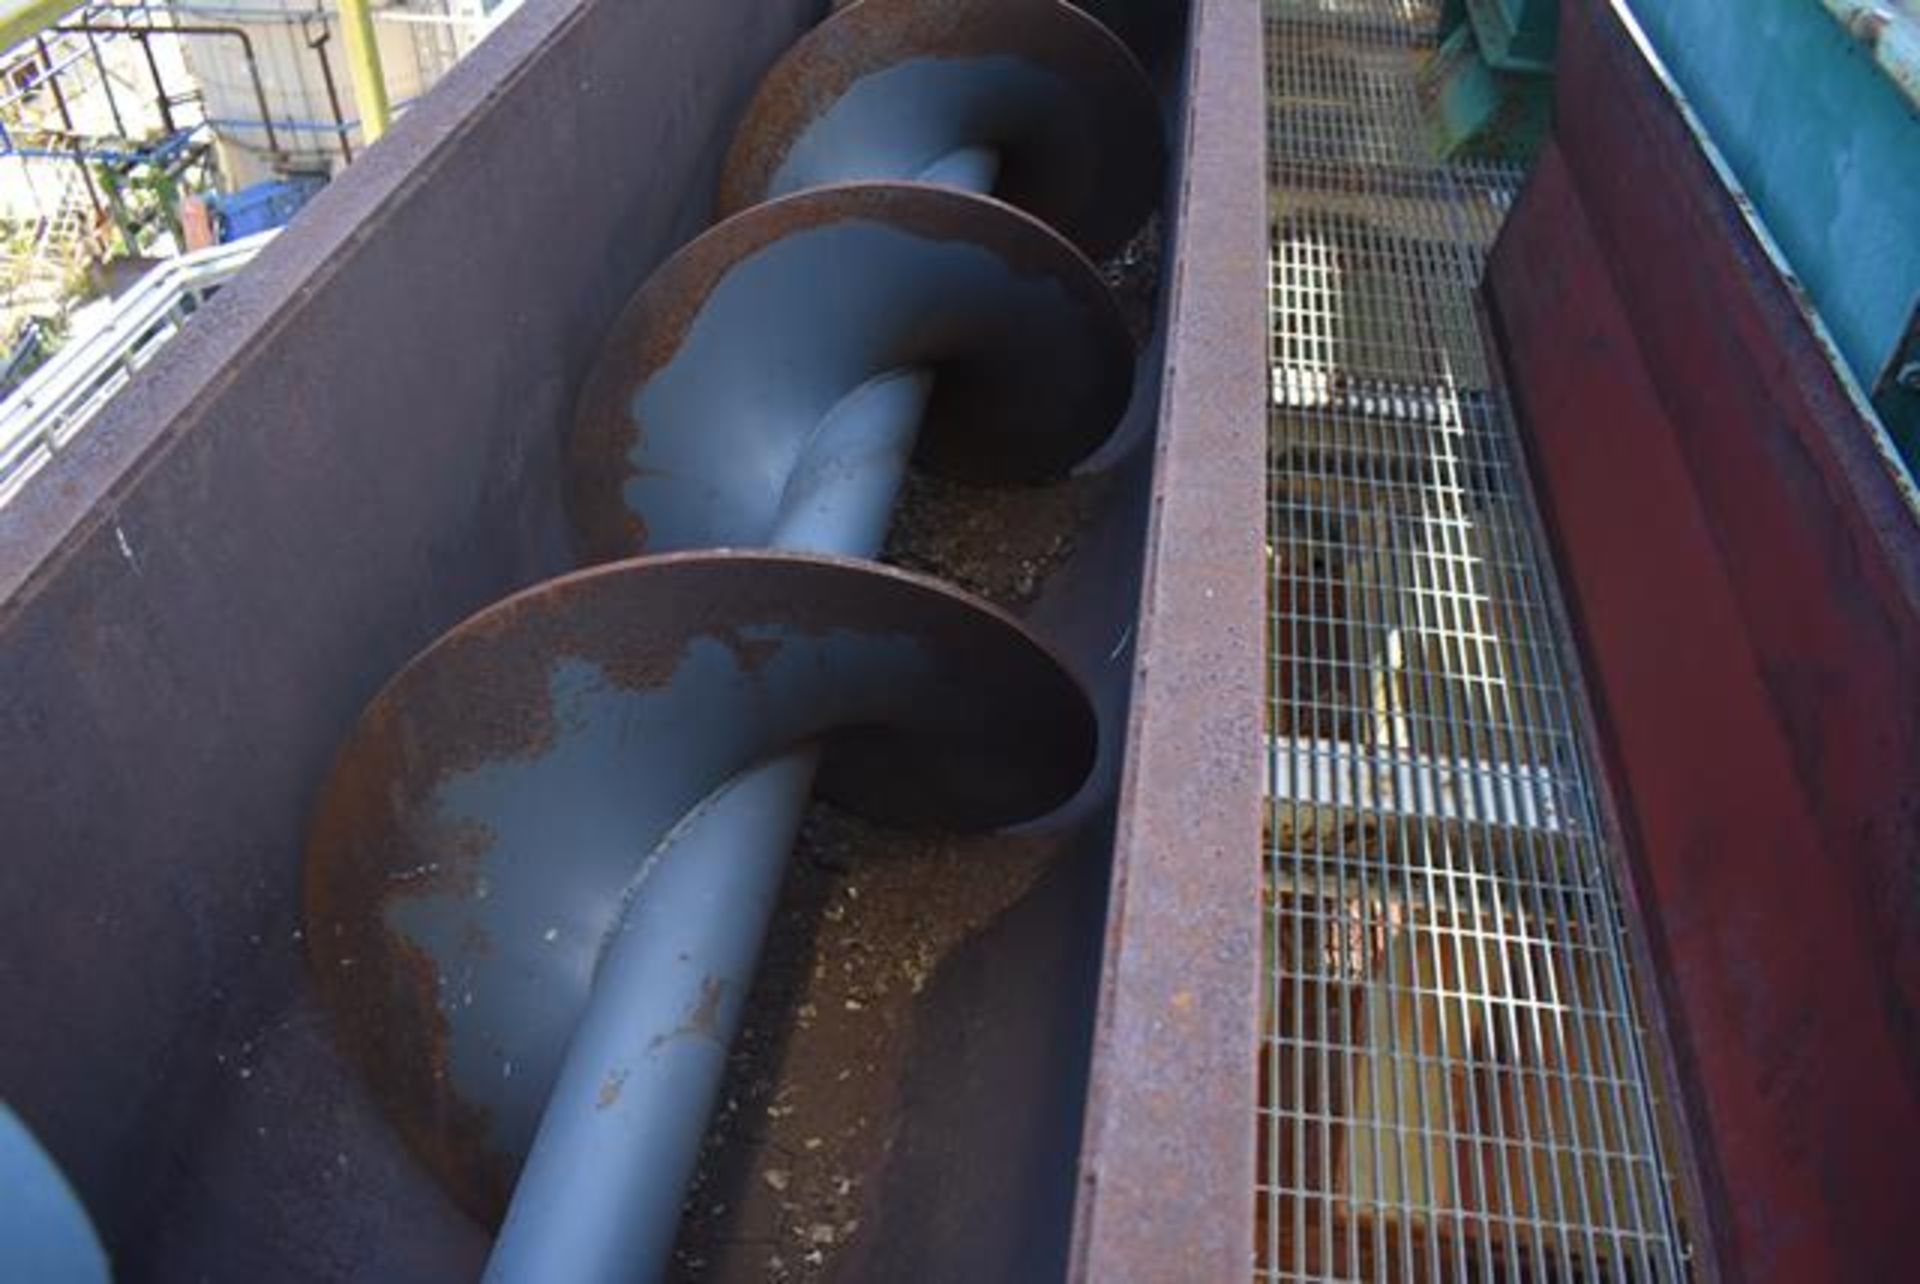 Motorized Discharge Screw Type Auger Conveyor, Approx. 45' Length, ID 02-SC-02 - Image 2 of 2